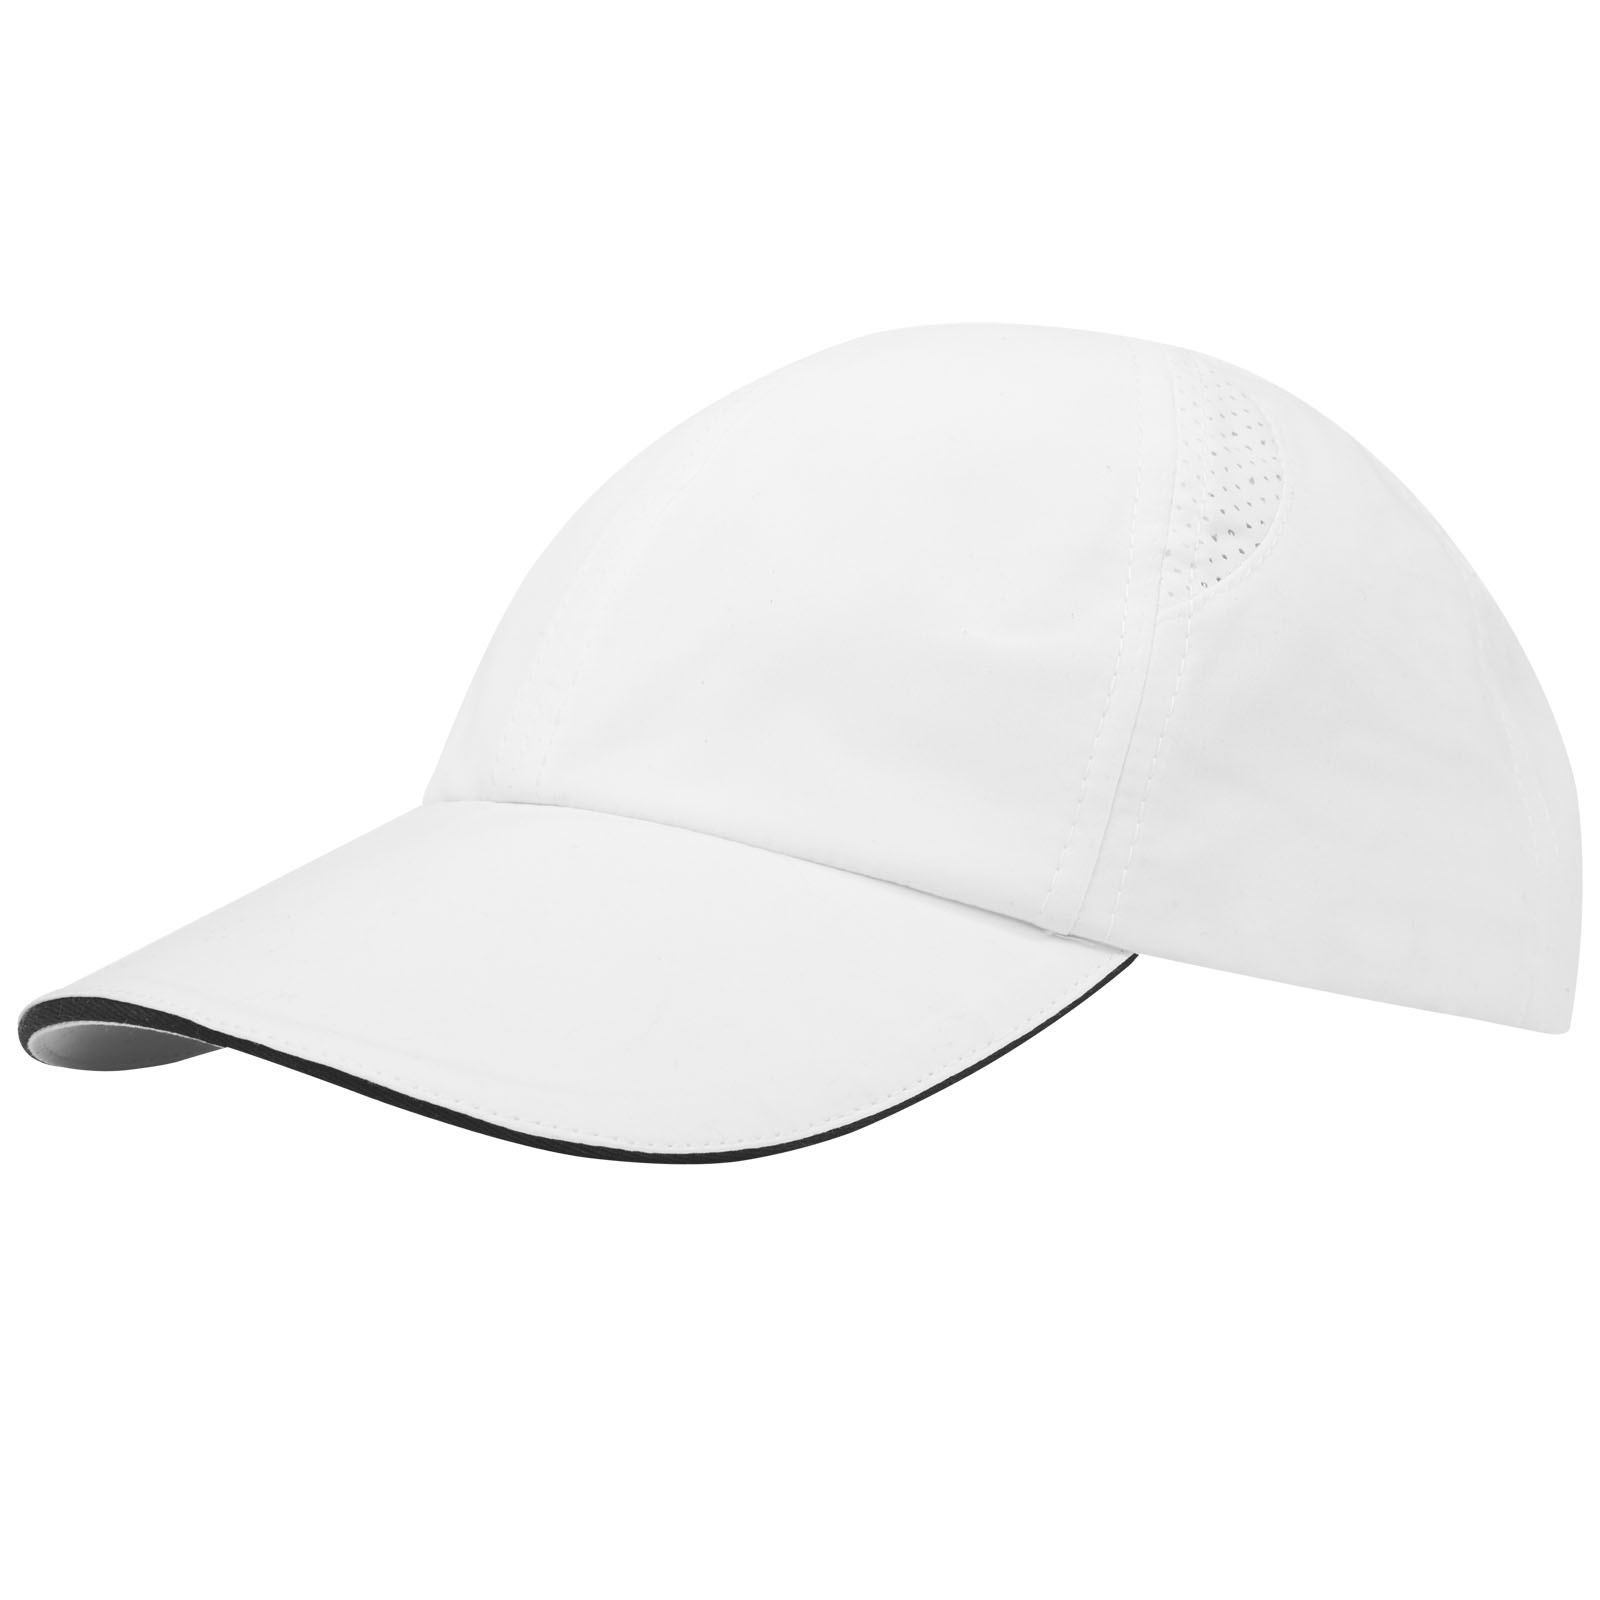 Advertising Caps & Hats - Morion 6 panel GRS recycled cool fit sandwich cap - 0